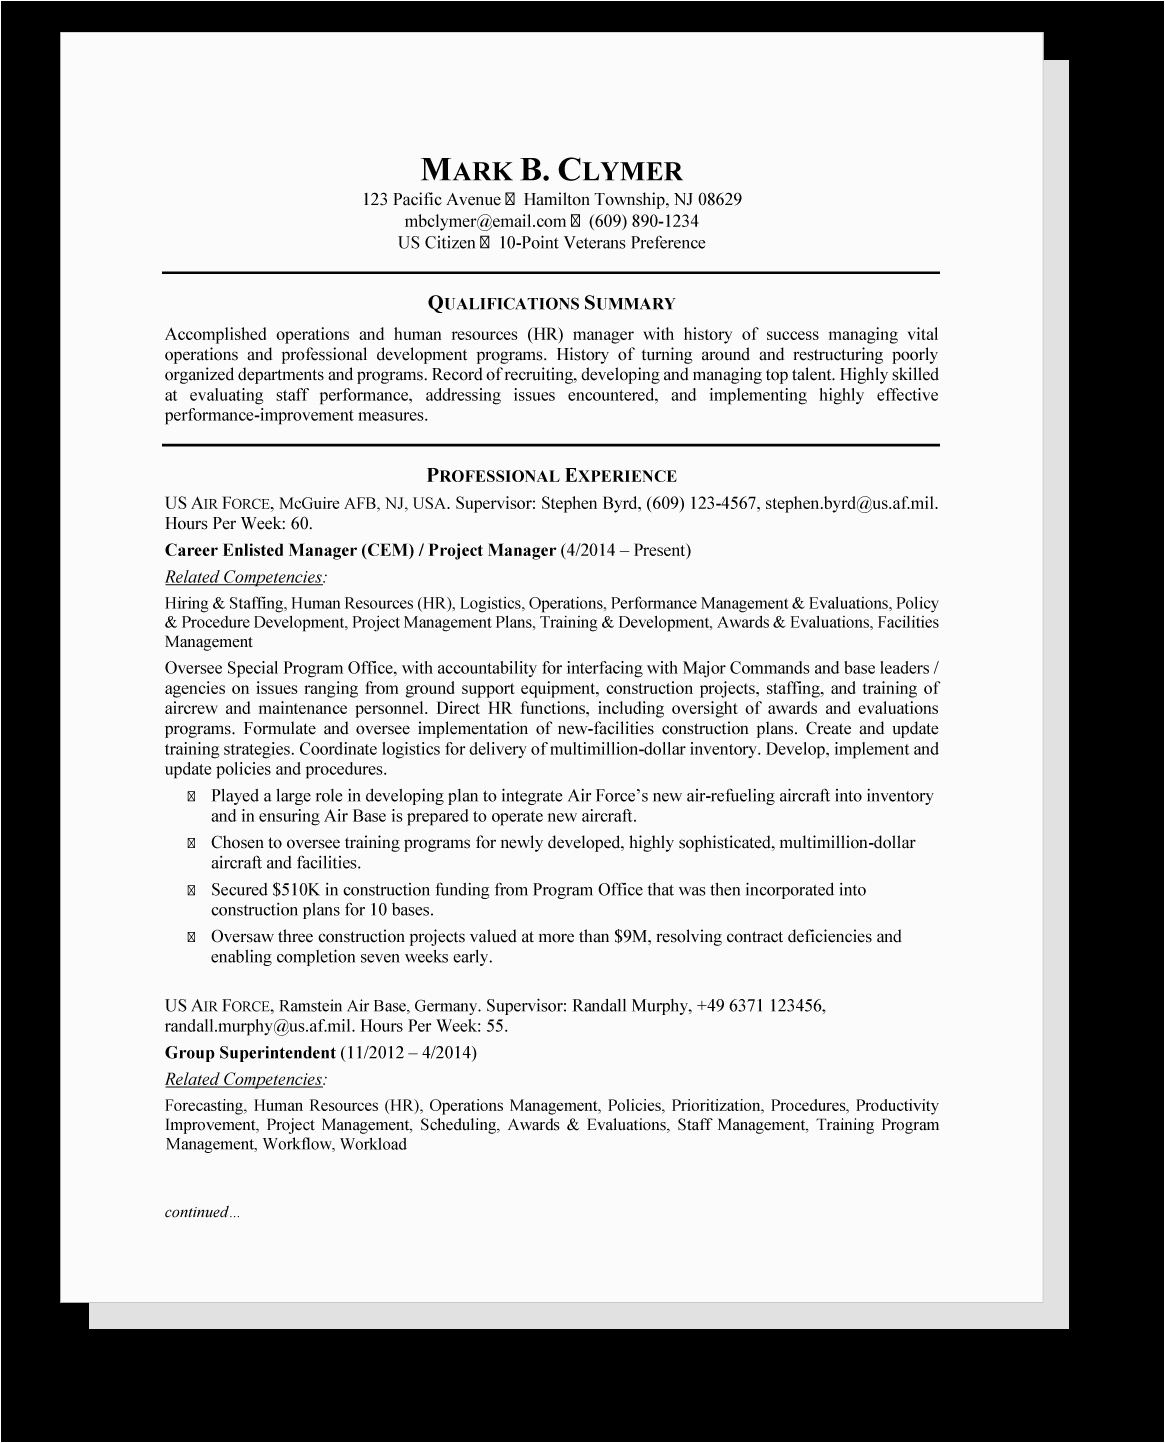 Samples for Resume for Faderal Jobs top Resume Tips for Writing A Federal Resume